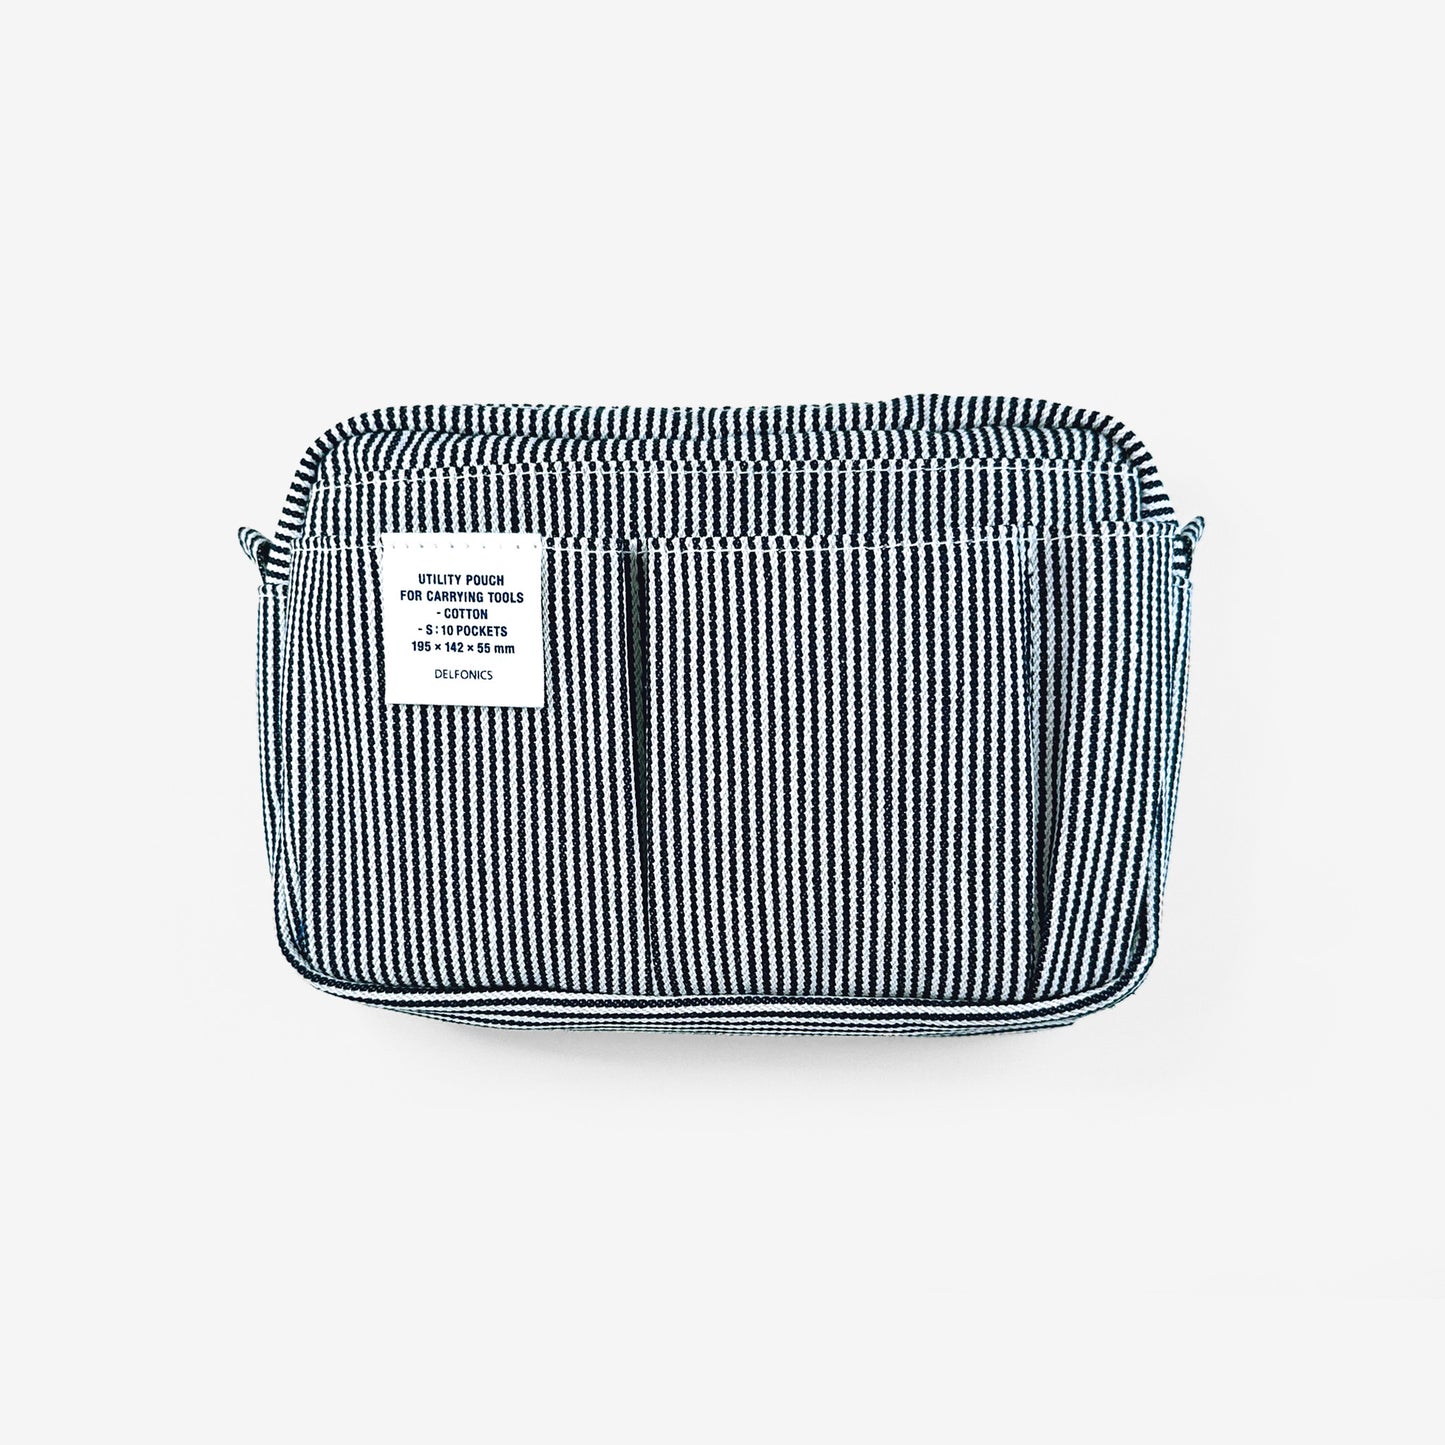 HICKORY STRIPED CARRYING CASE | TWO SIZES